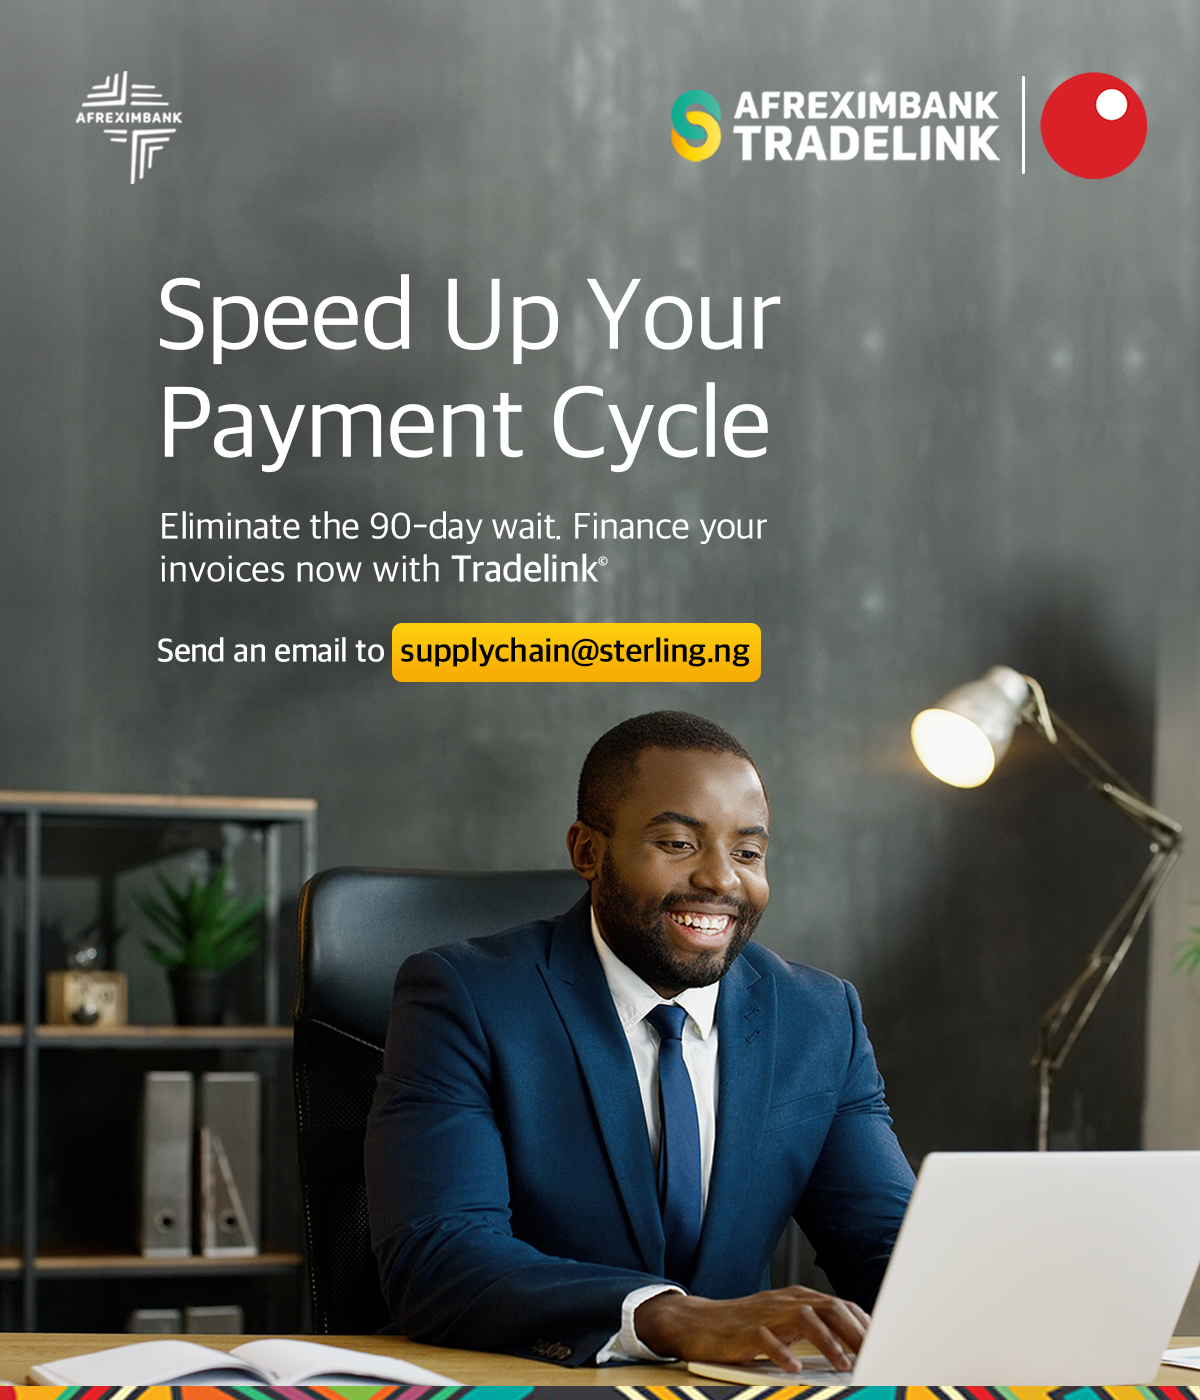 Businessman smiling and working on a laptop at his desk with text promoting Afreximbank Tradelink. The text reads: 'Speed Up Your Payment Cycle. Eliminate the 90-day wait. Finance your invoices now with Tradelink. Send an email to supplychain@staging.sterling.ng.